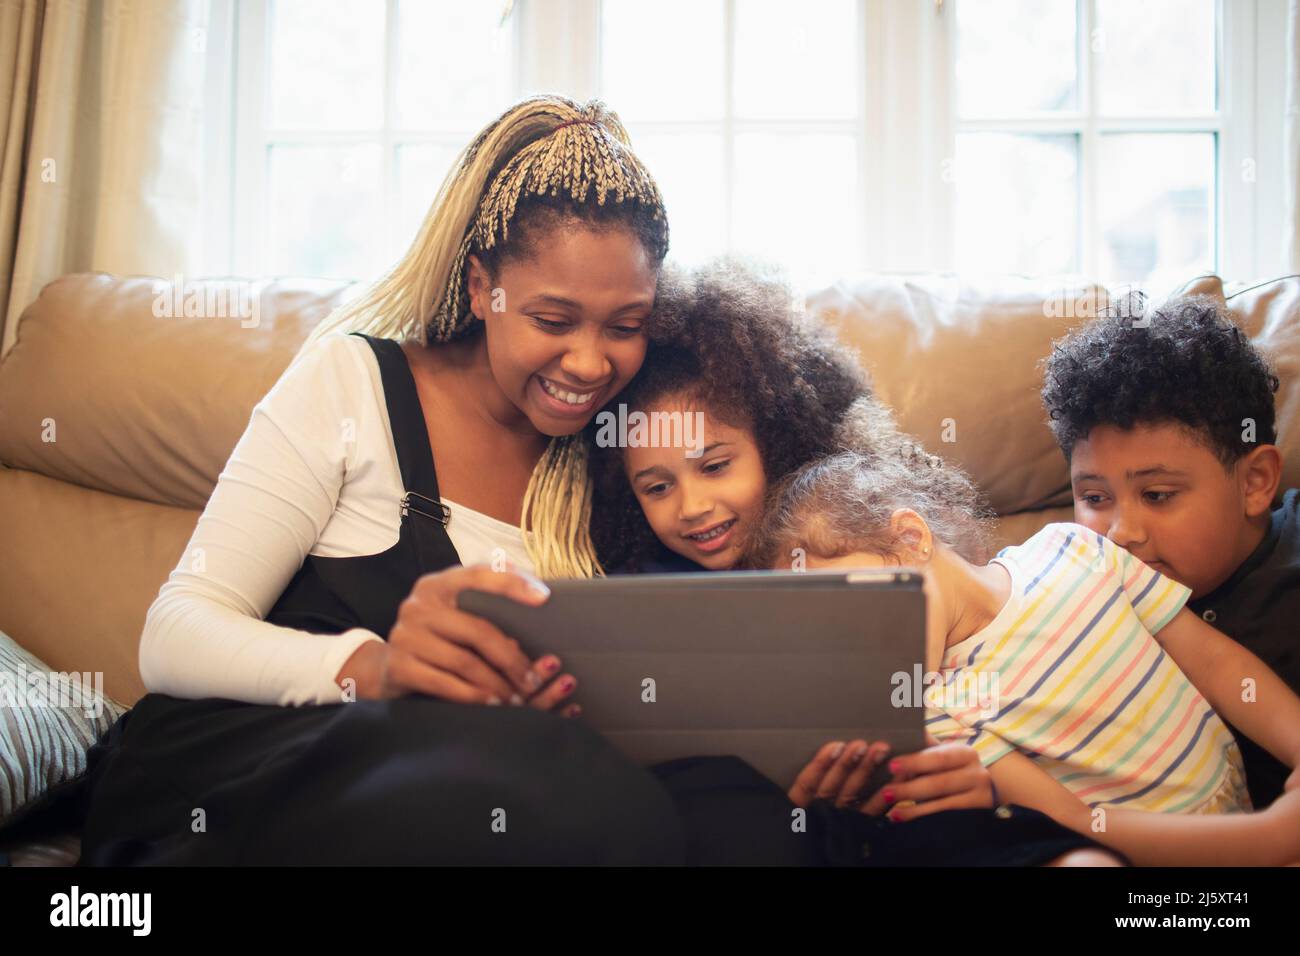 Happy mother and kids video chatting with digital tablet on sofa Stock Photo